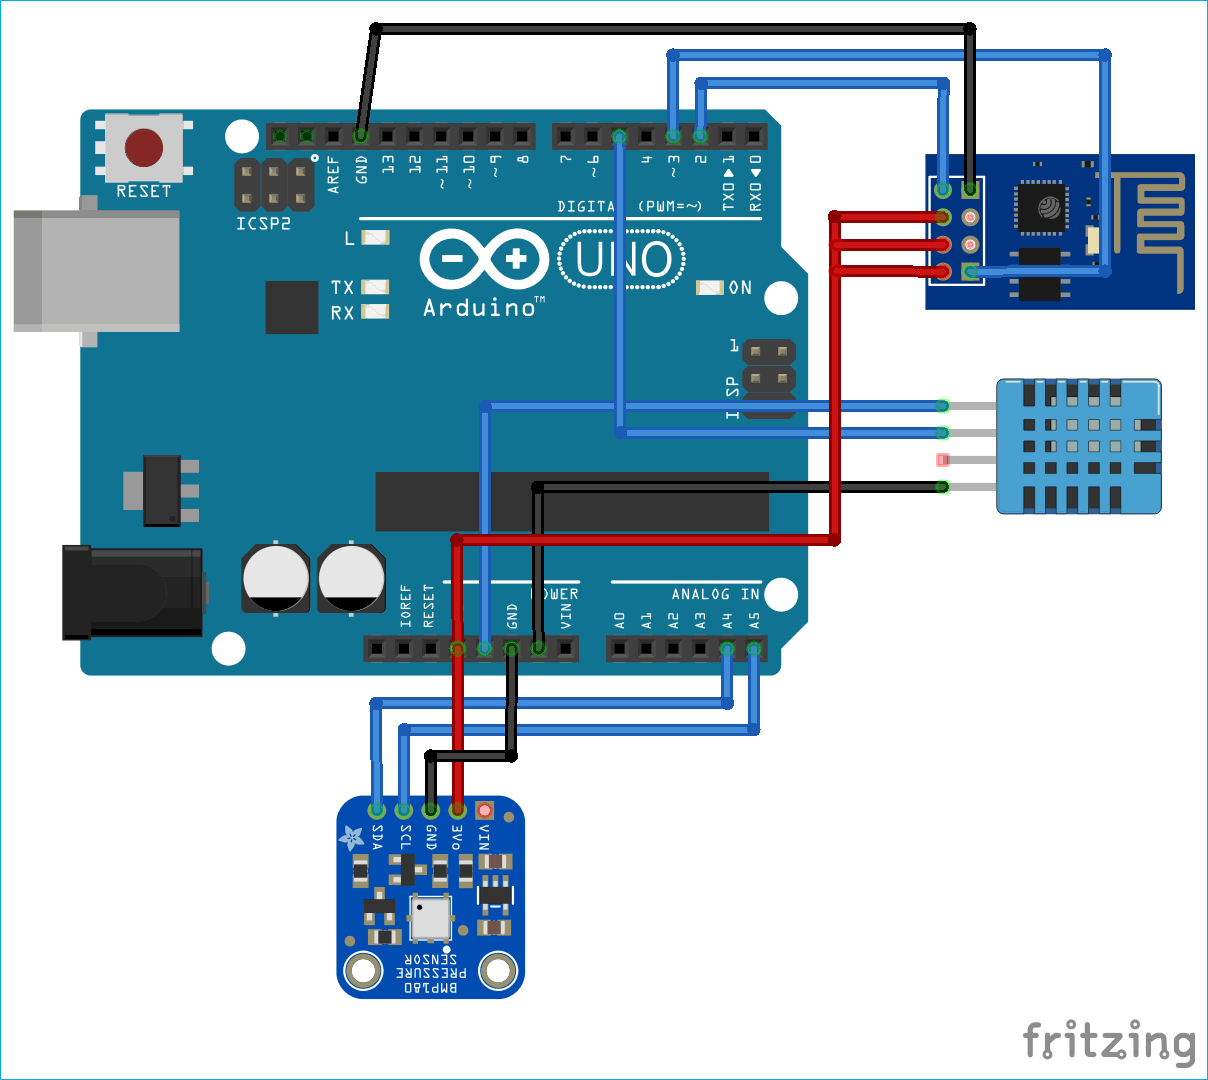 circuit-diagram-for-iot-wireless-weather-station-using-arduino-esp8266-and-thingspeak_i6w5avlMsP.png